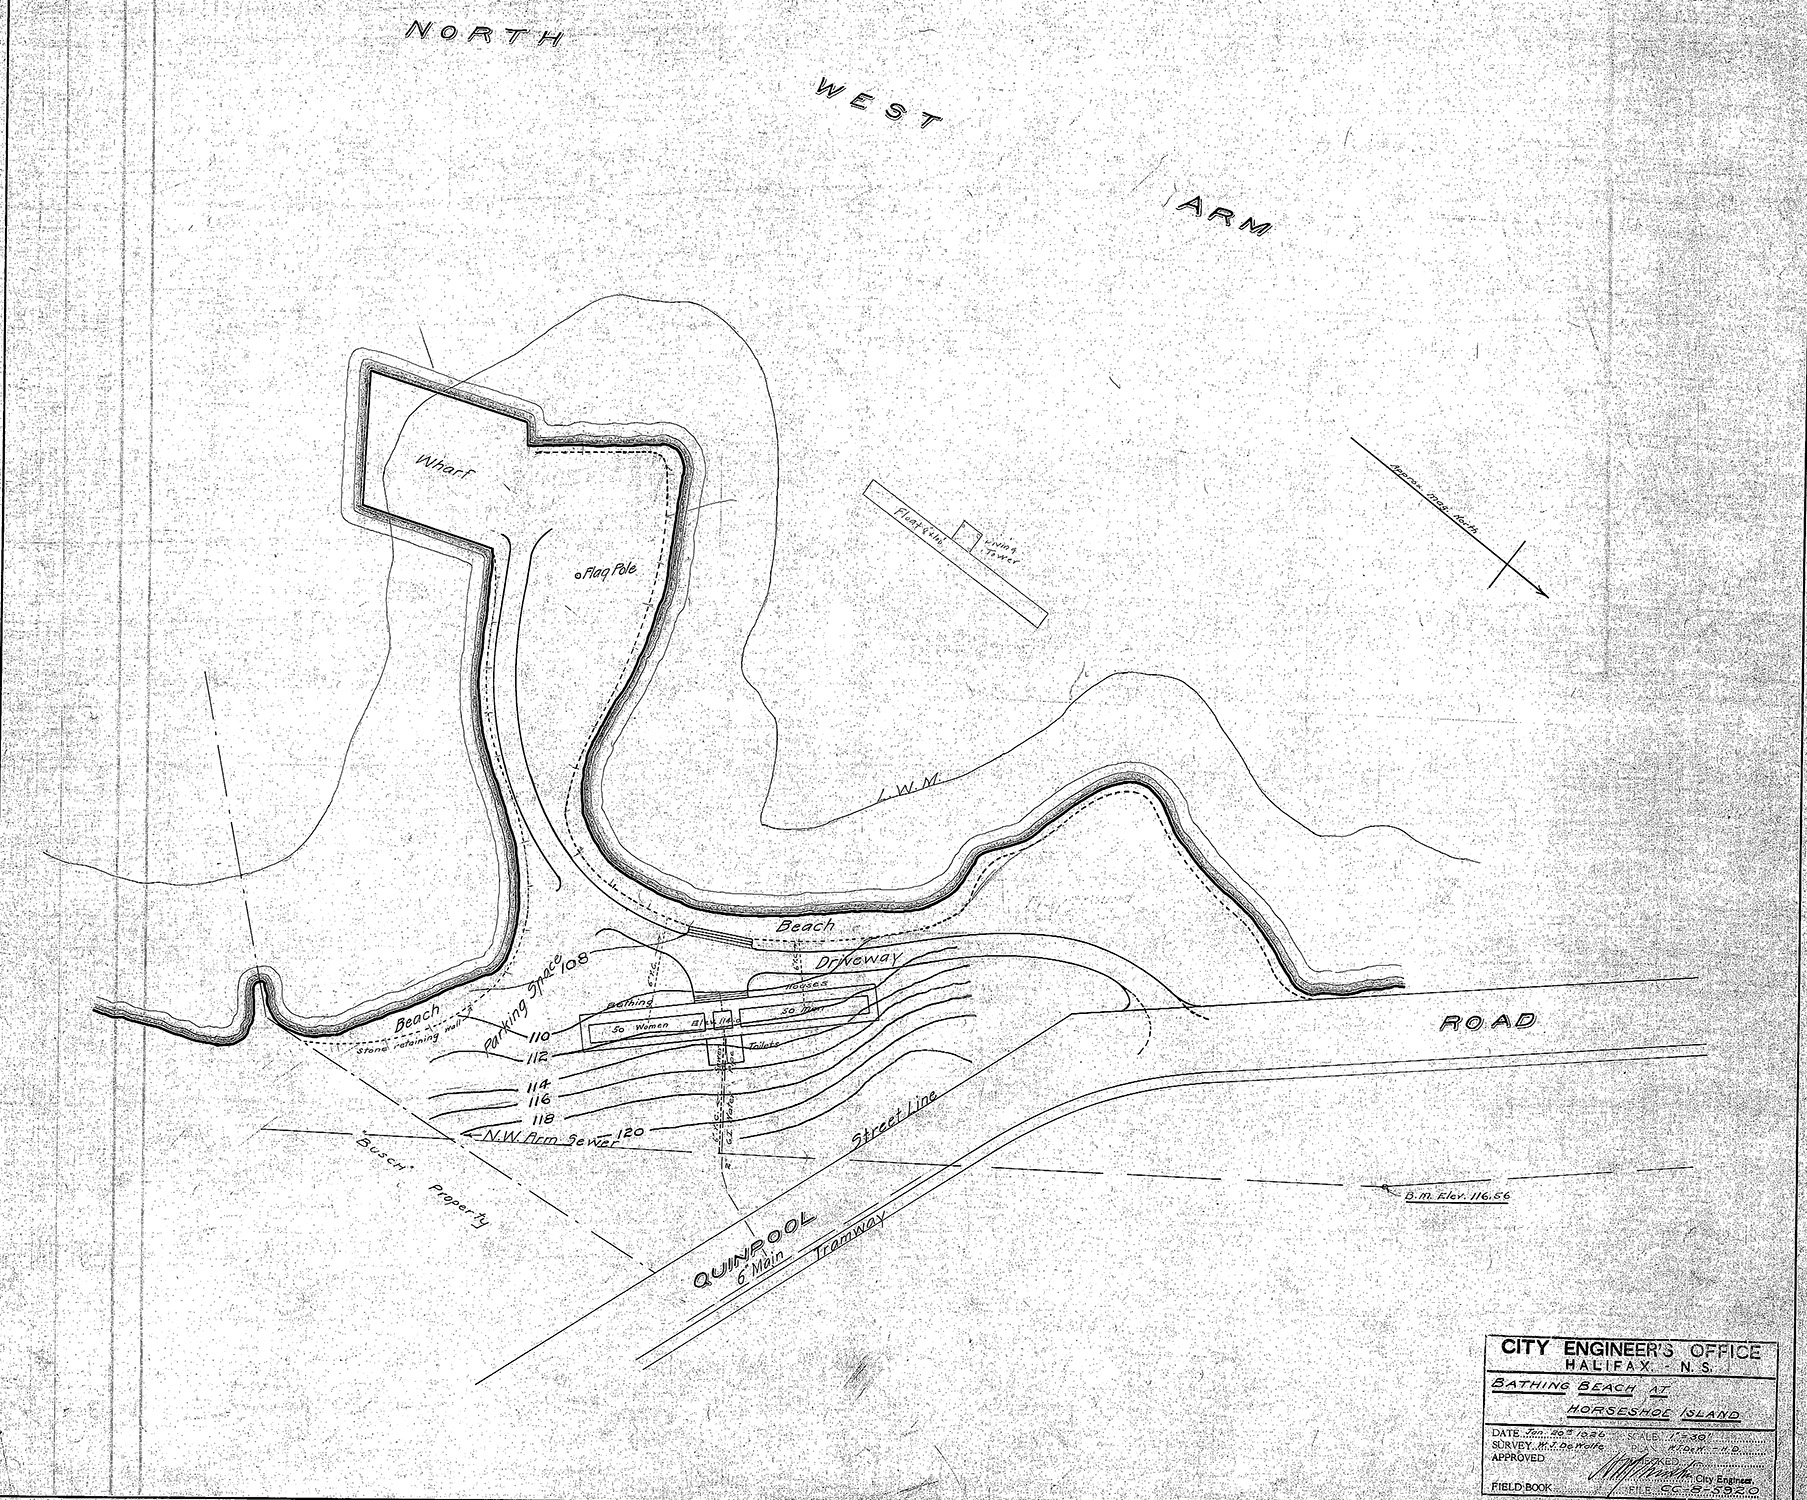 Black and white site plan for bathing beach at Horseshoe Island, 1926.